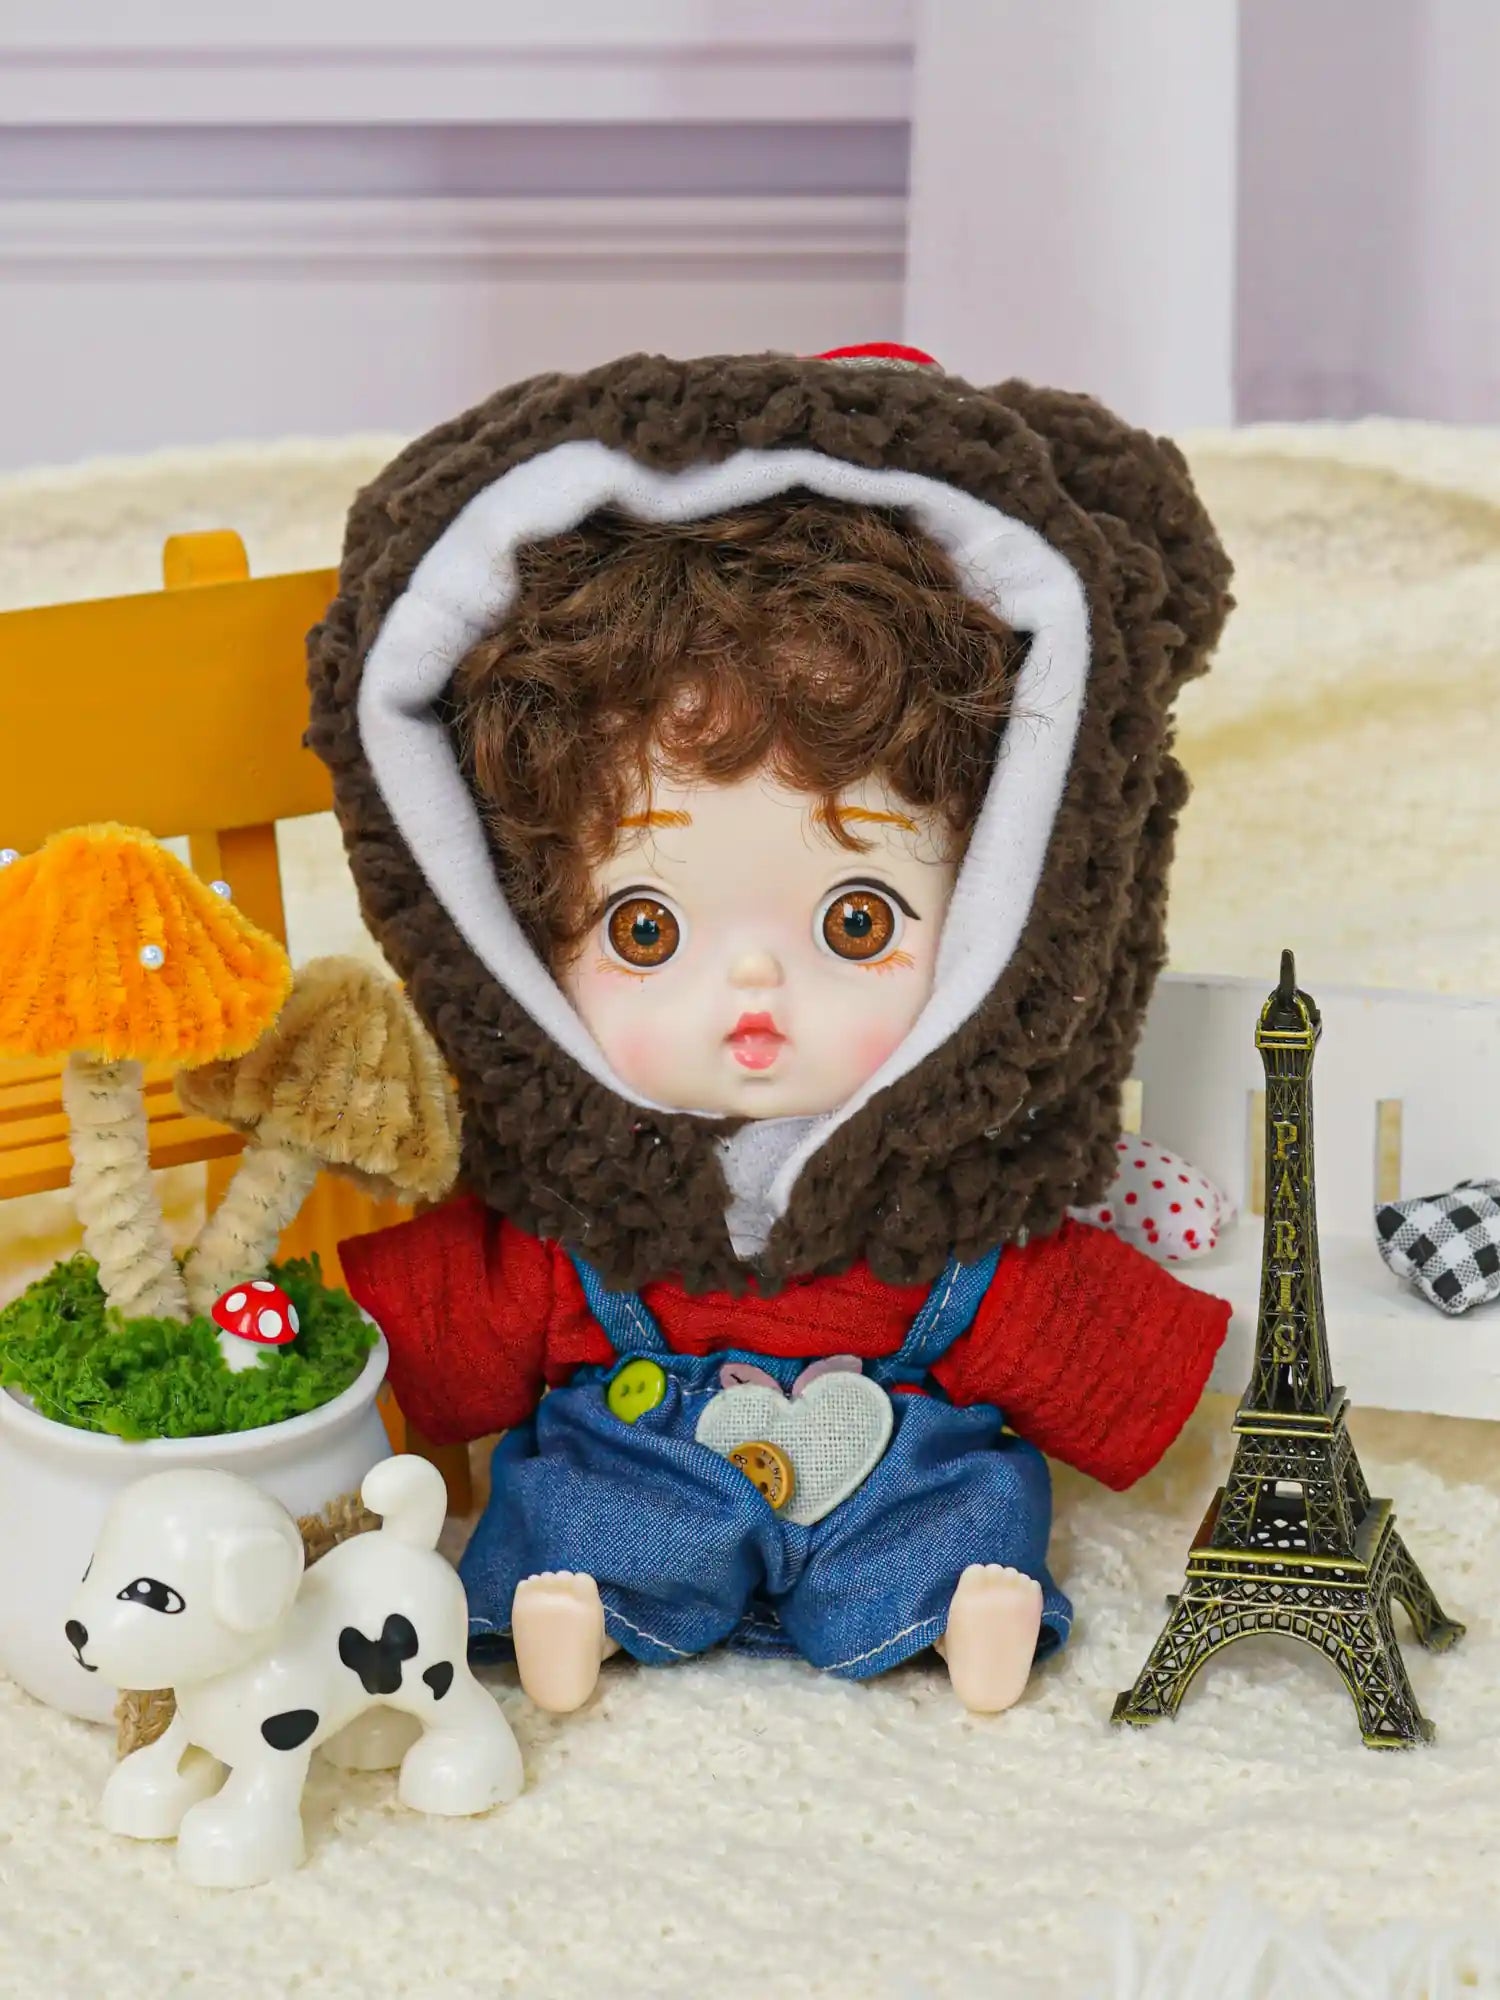 A brown-eyed doll with a plush bear hood and overalls, next to a small Eiffel Tower and a playful dog figurine.